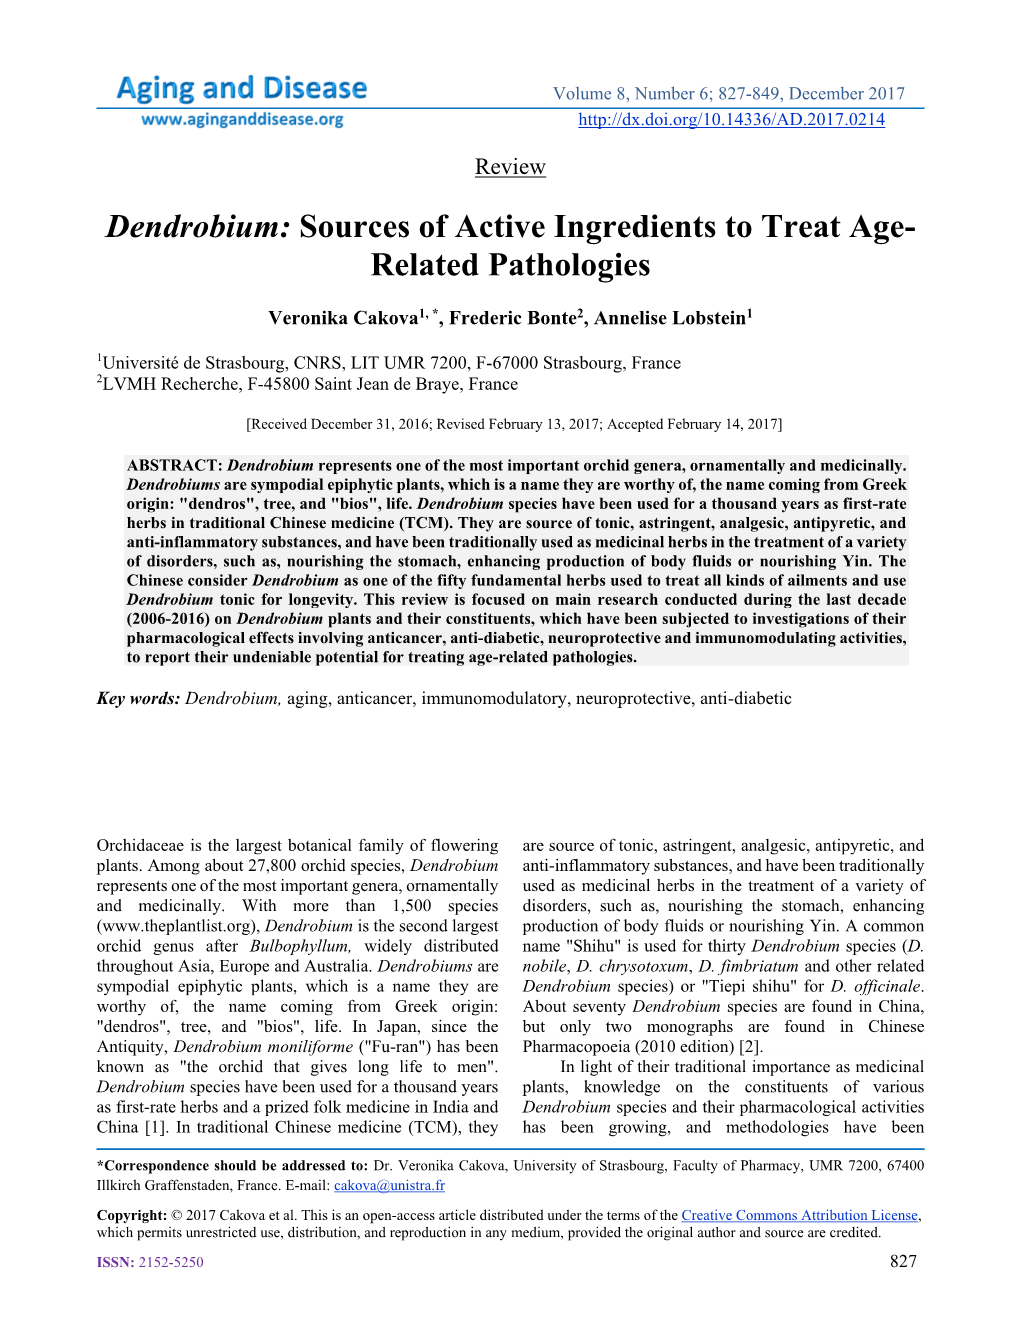 Dendrobium: Sources of Active Ingredients to Treat Age- Related Pathologies